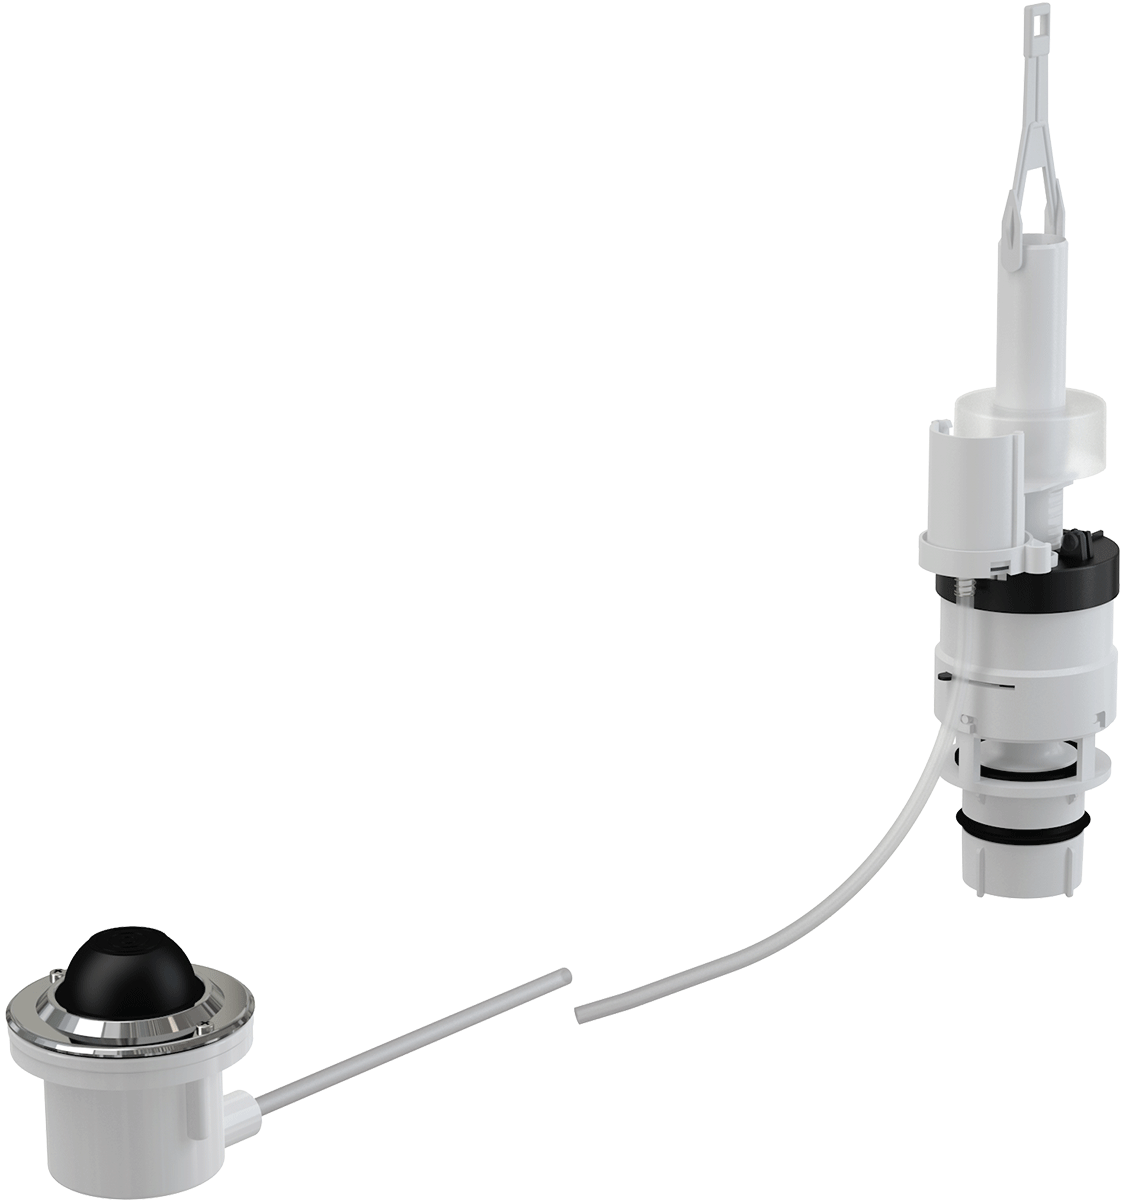 MPO13 - Remote pneumatic flush for foot operation, metal, installation: onto the wall